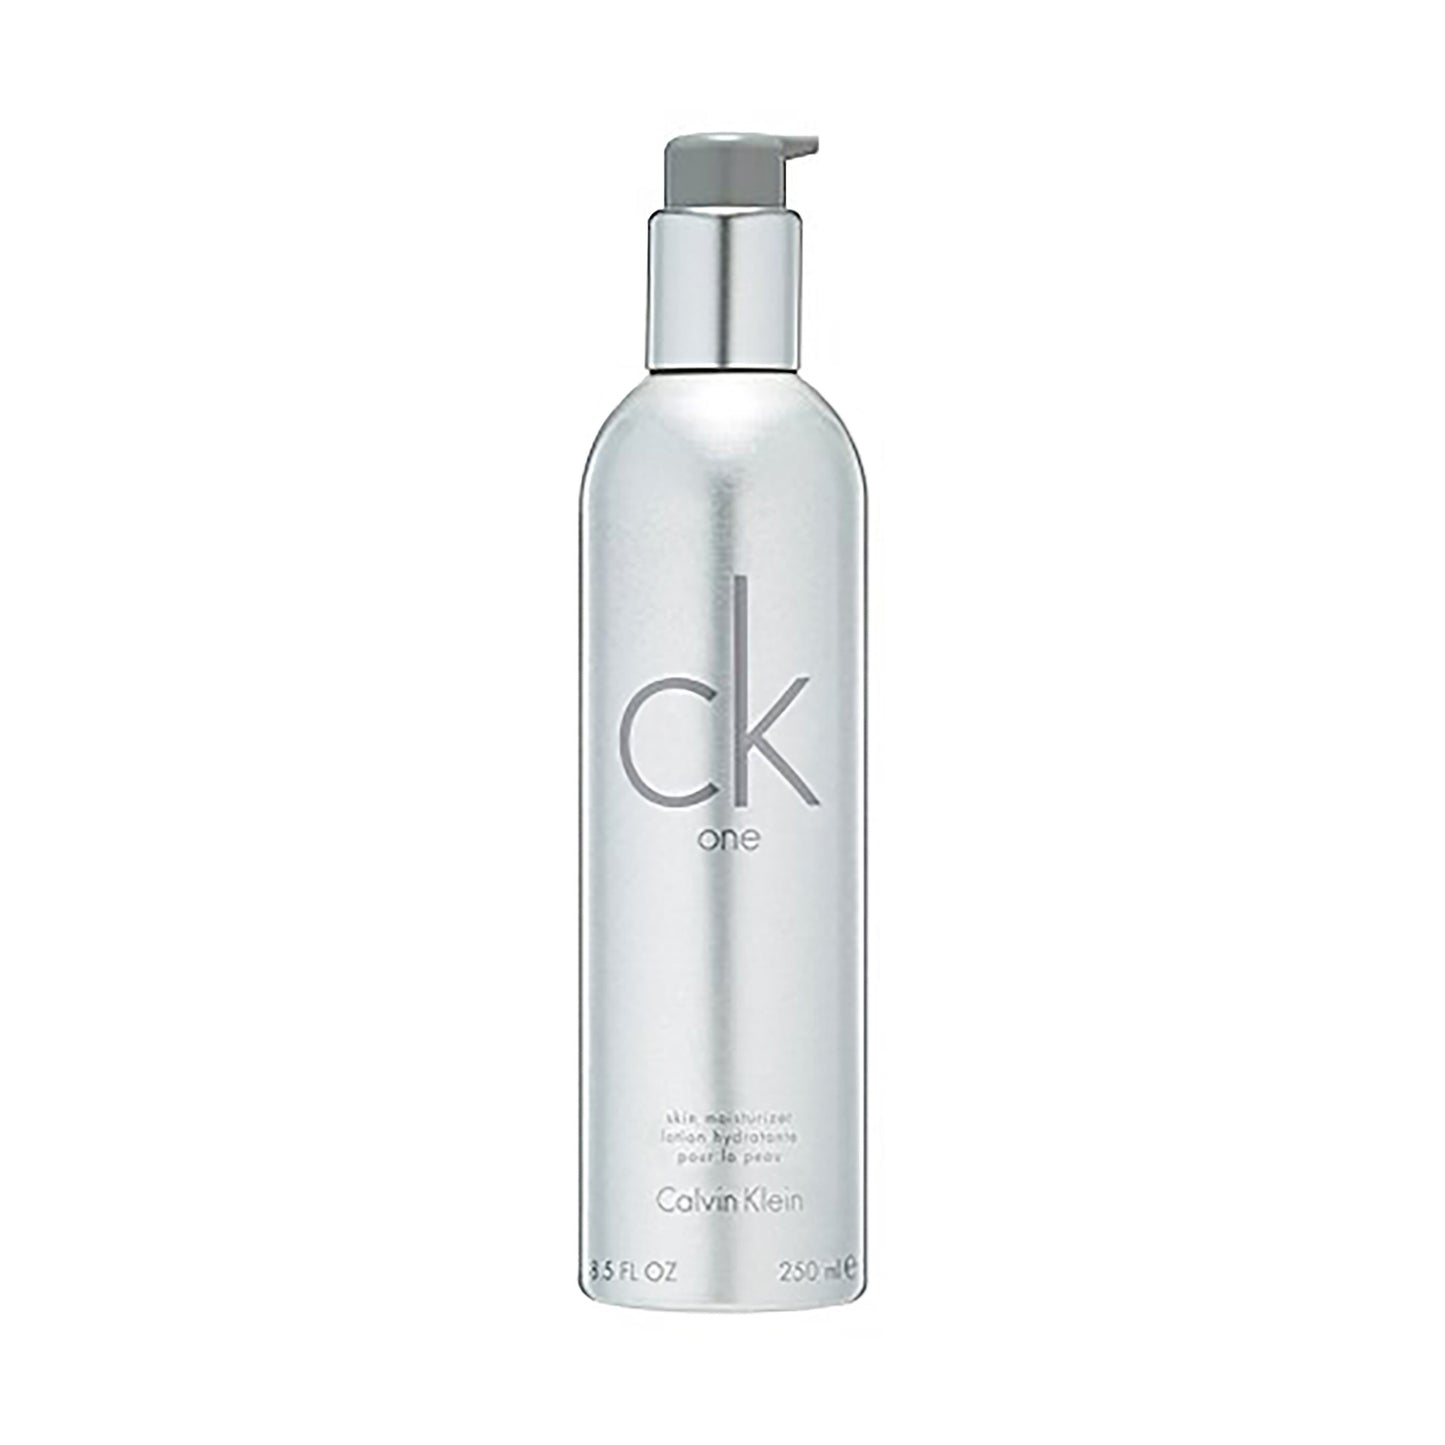 Ck One Body Lotion